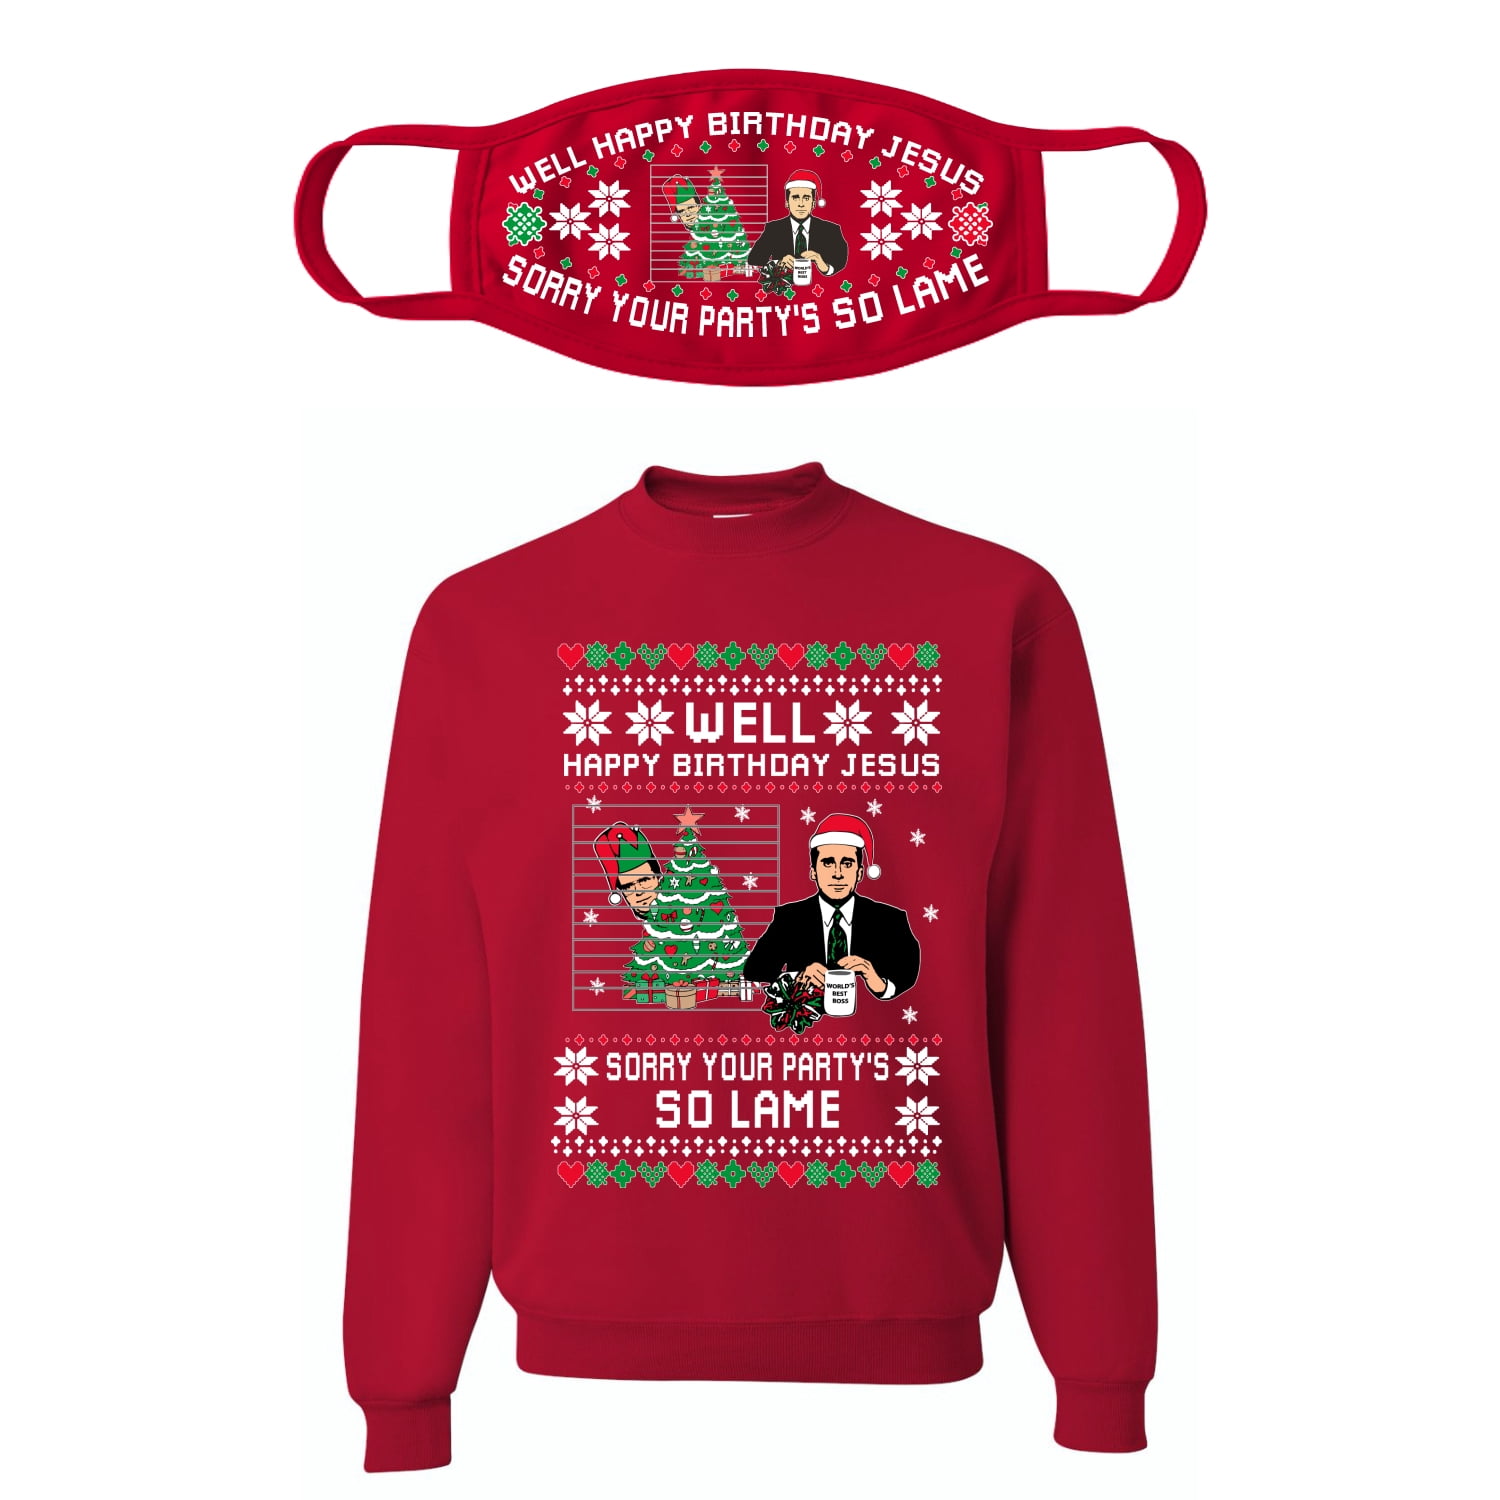 Well Happy Birthday Jesus Funny Quote Office Ugly Christmas Sweater Unisex  Crewneck Sweatshirt- Face Cover Combo, Black, 3XL 